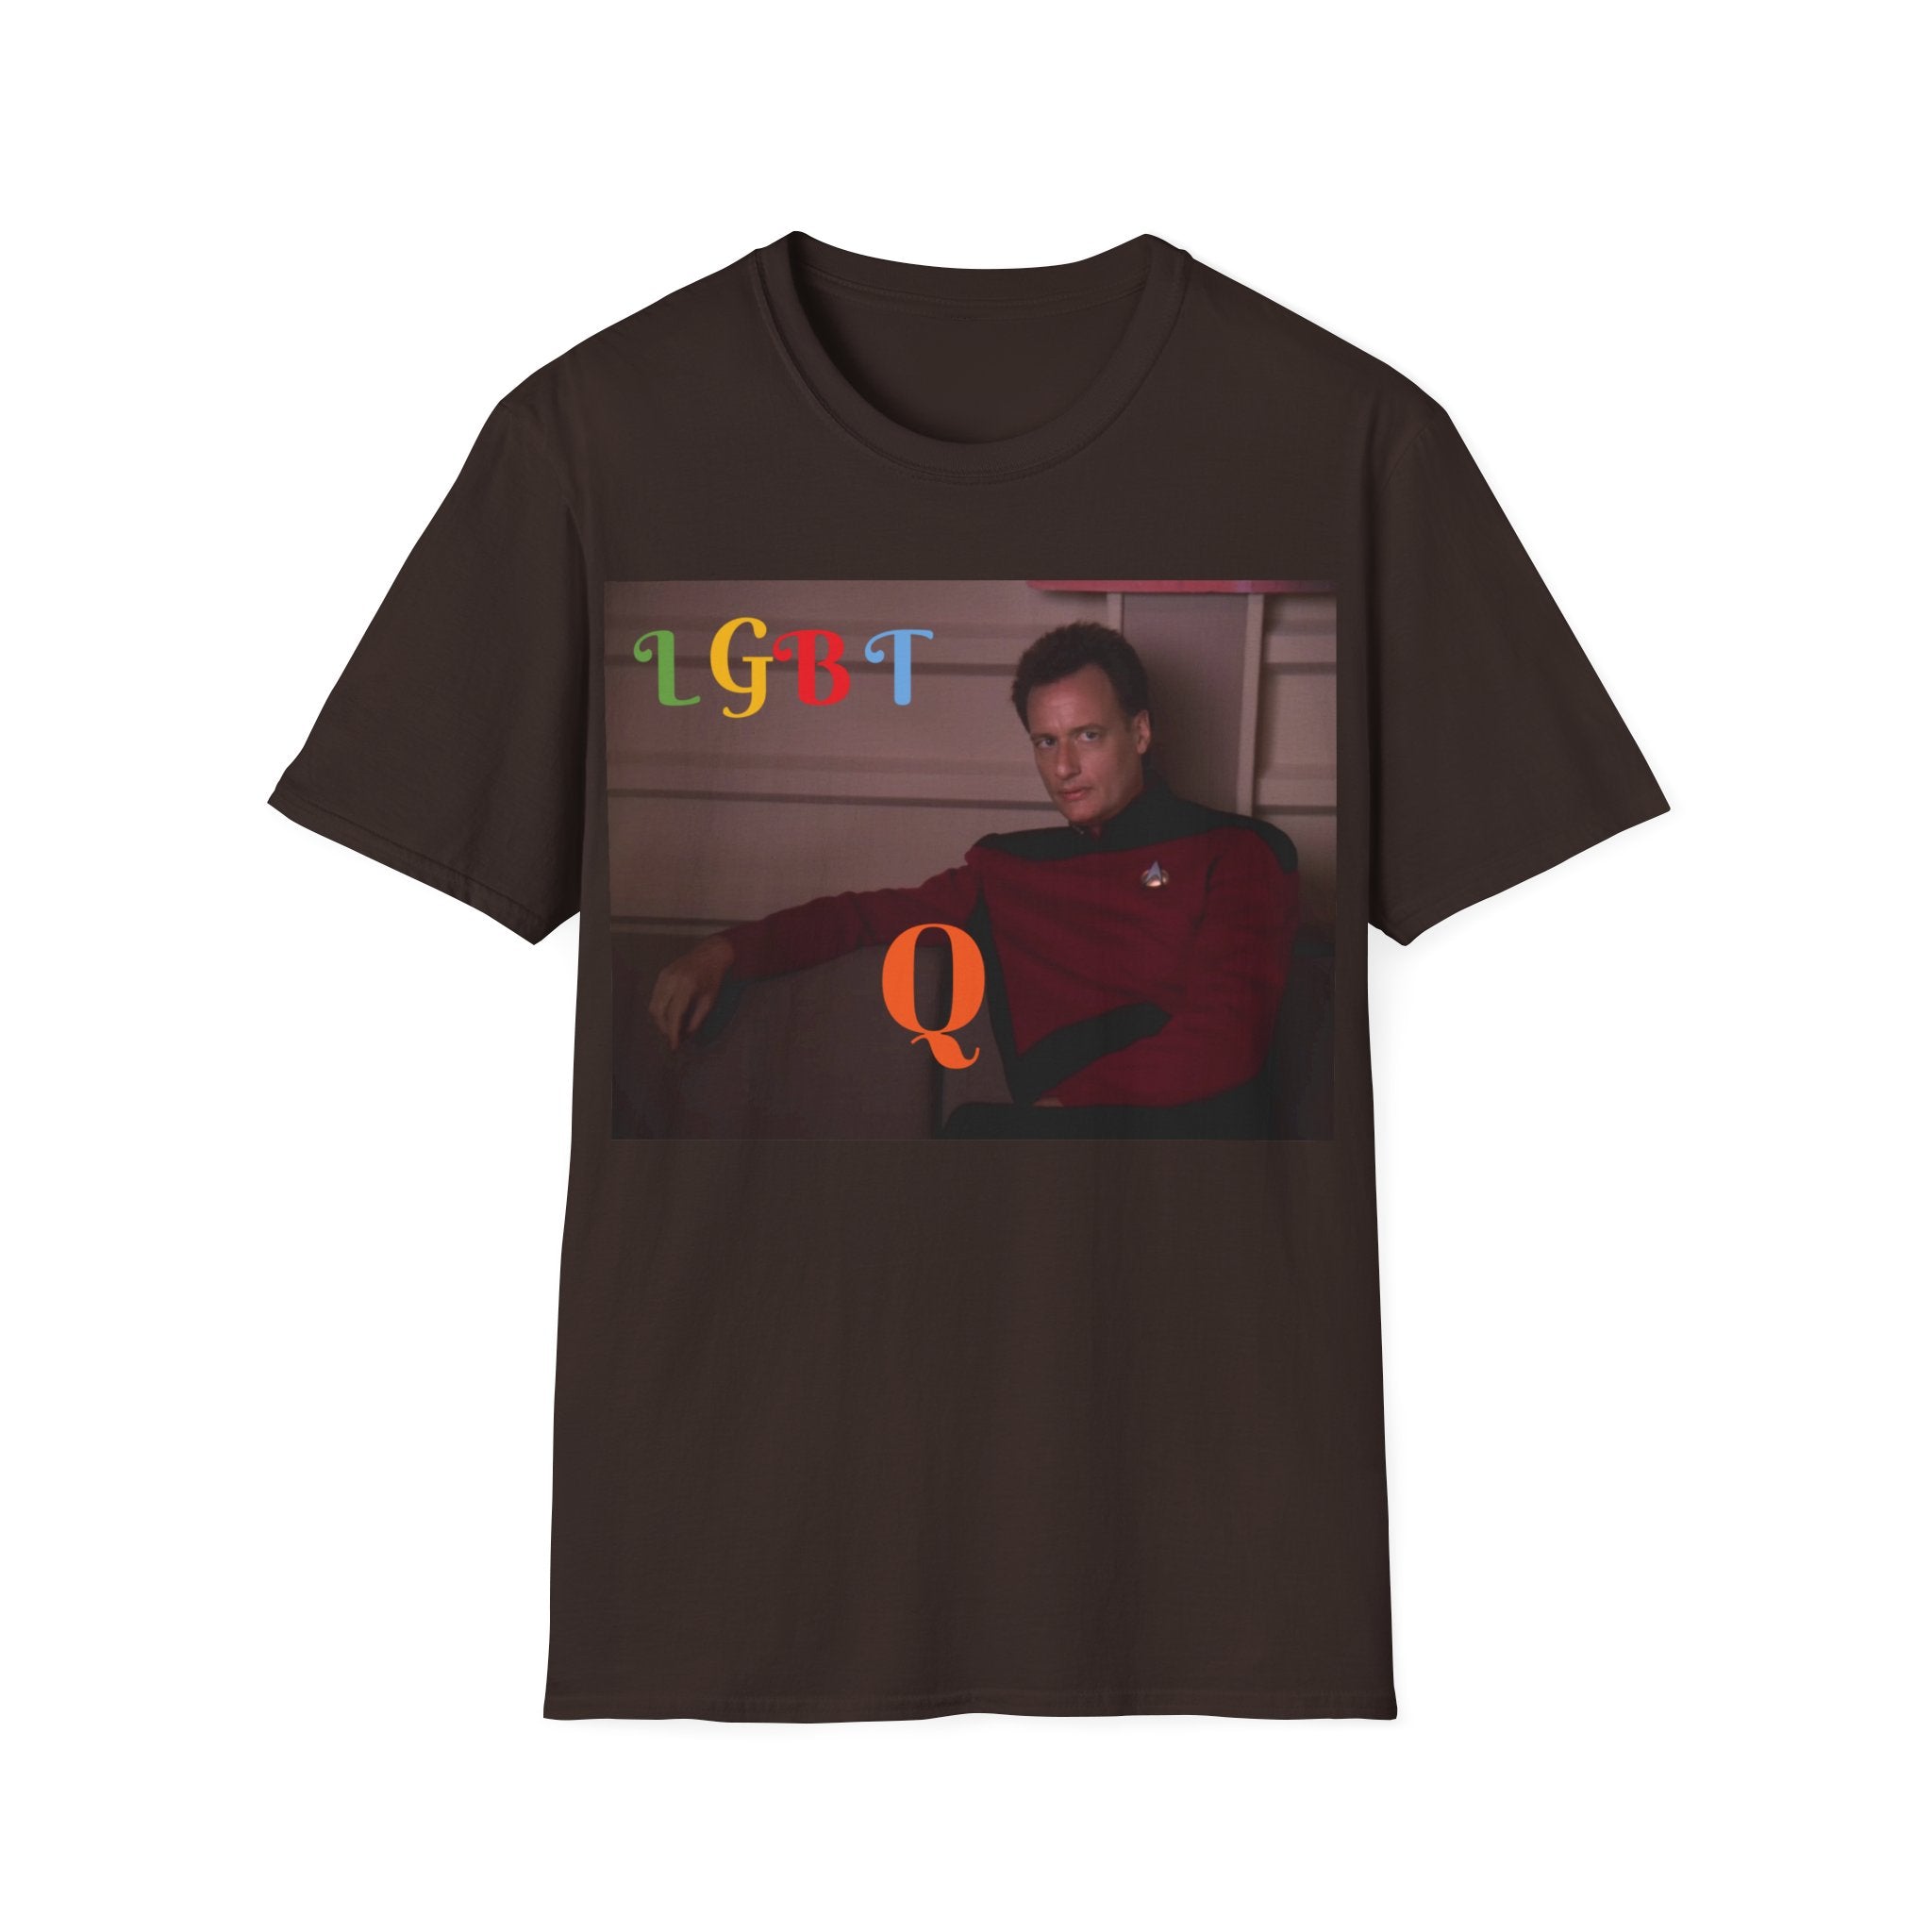 This unique design combines a love for the iconic sci-fi series with a proud nod to LGBTQ support, featuring a humorous twist with the character Q. Perfect for Star Trek fans and members of the LGBTQ community, this shirt is a fun way to show pride and passion for both.